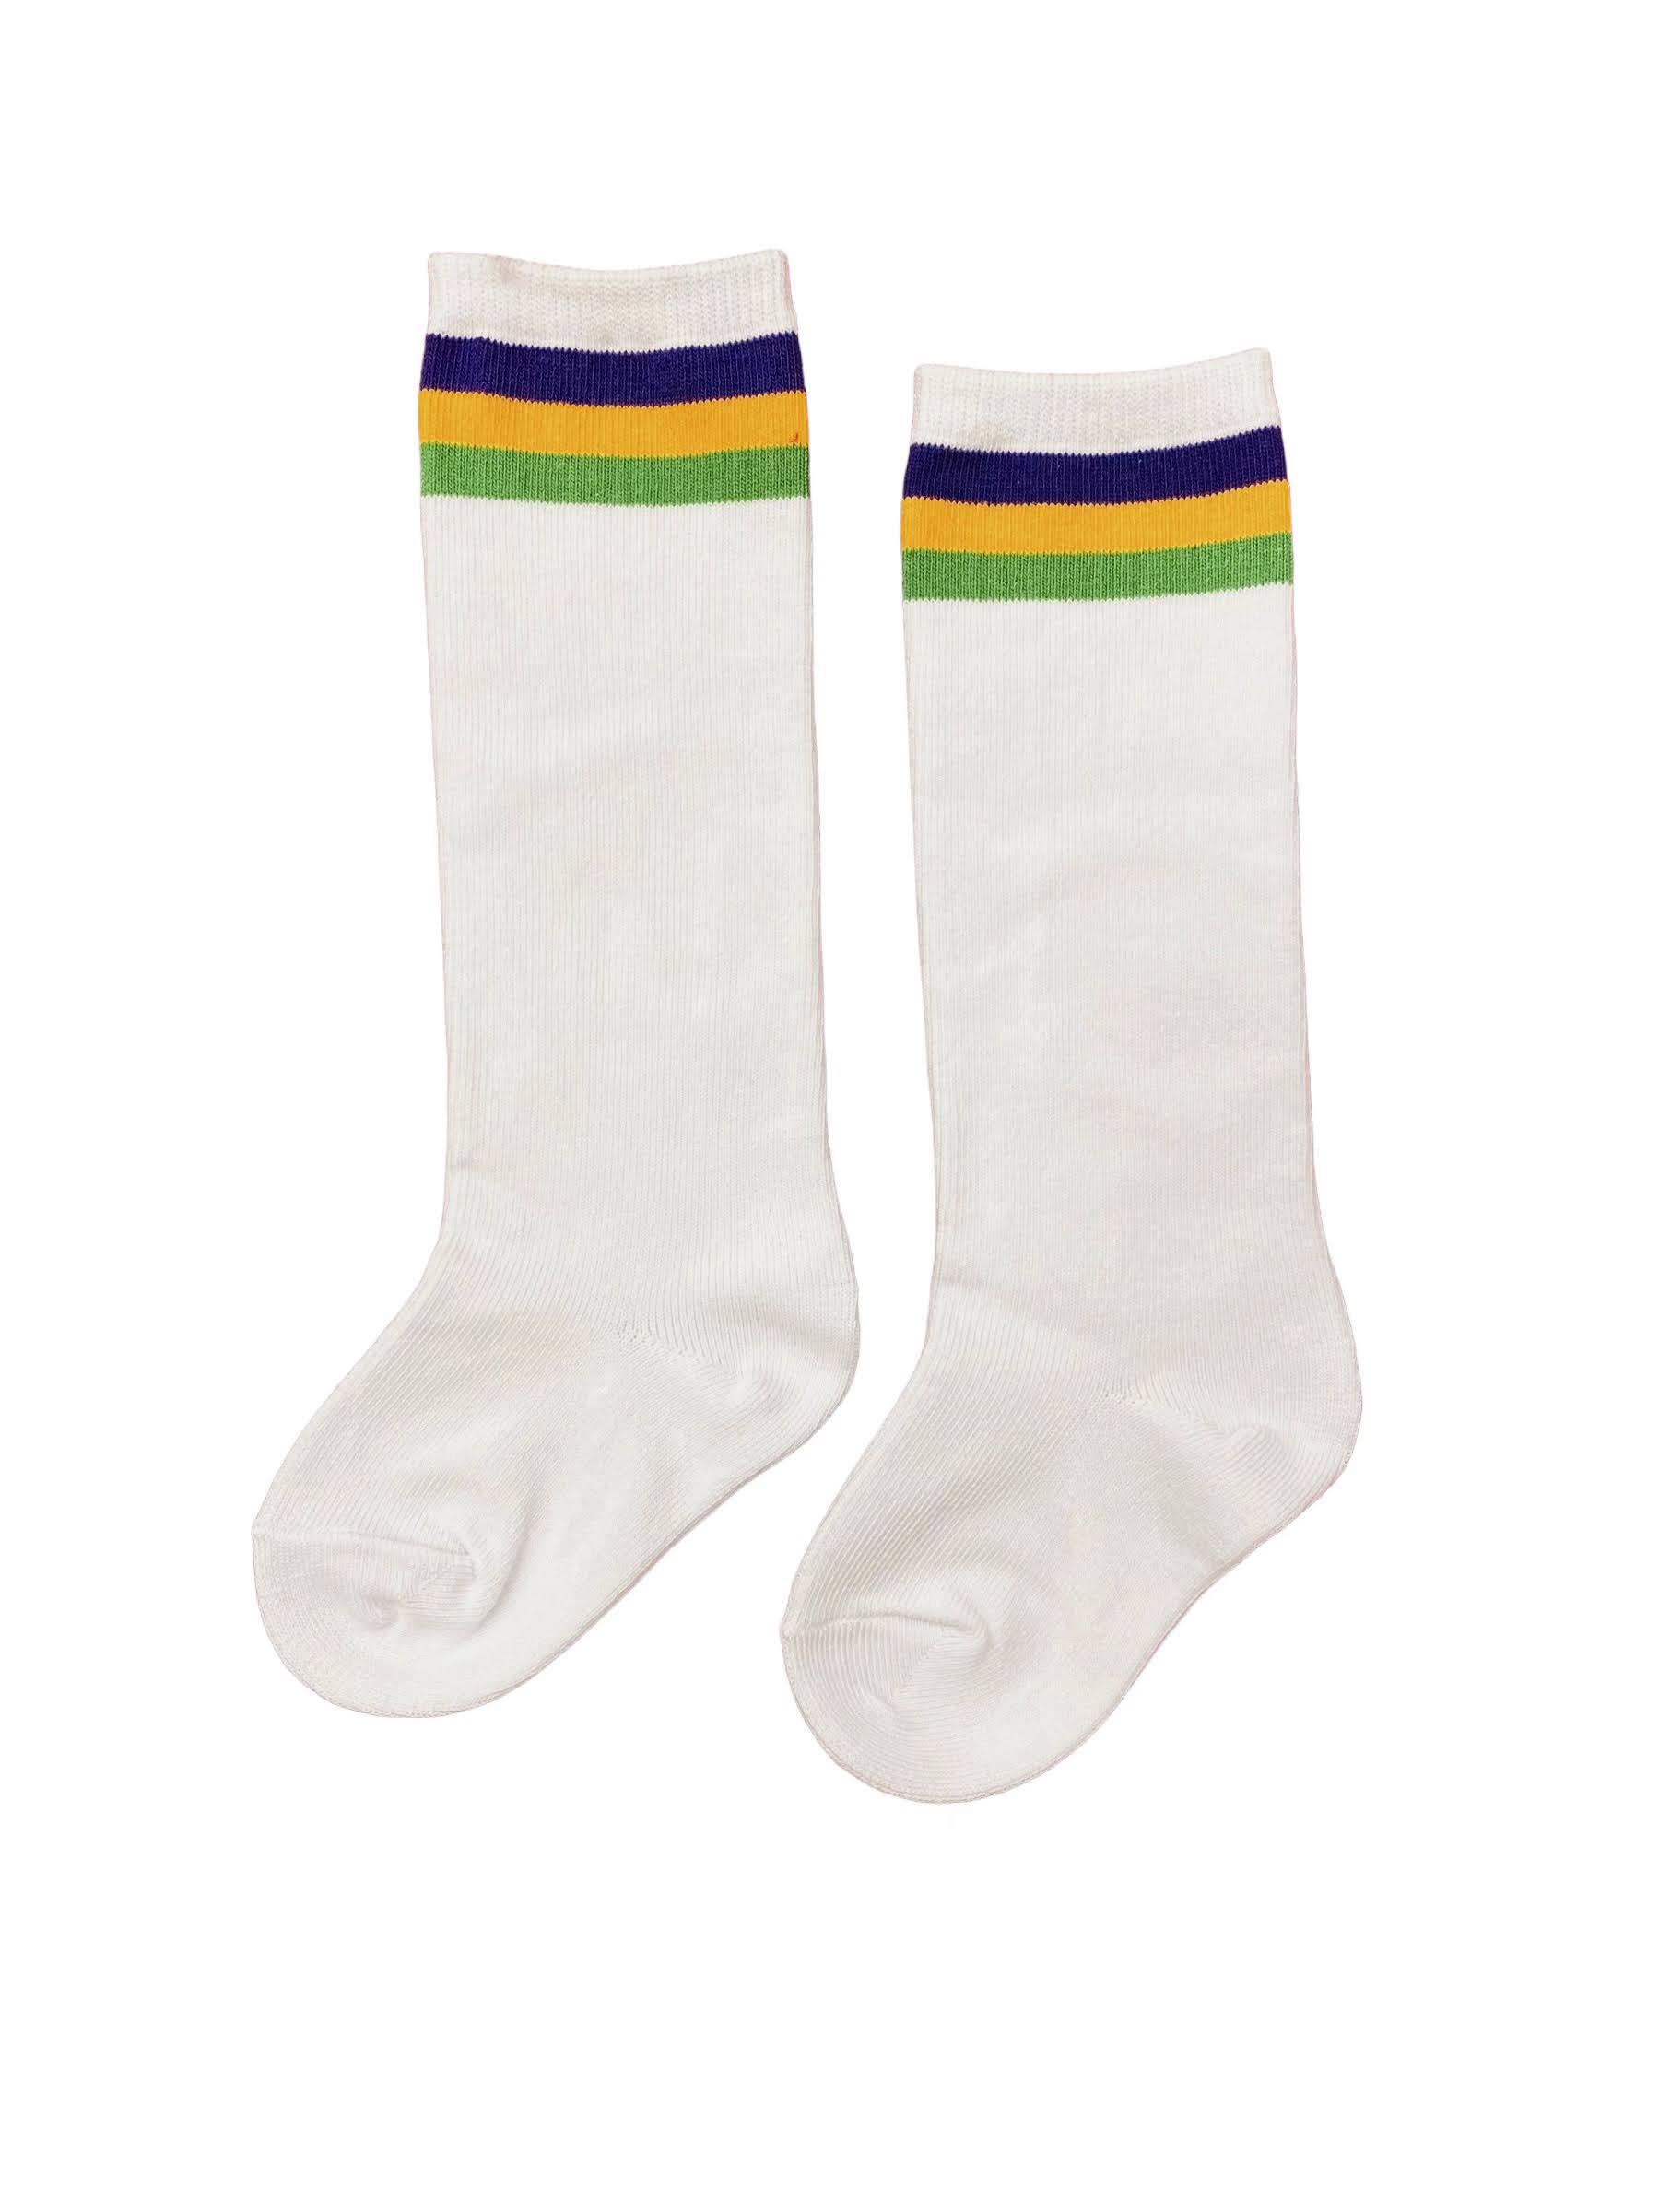 A pair of Mardi Gras Knee High Socks with green, yellow and blue stripes, perfect for Mardi Gras celebrations by Lulu Bebe.